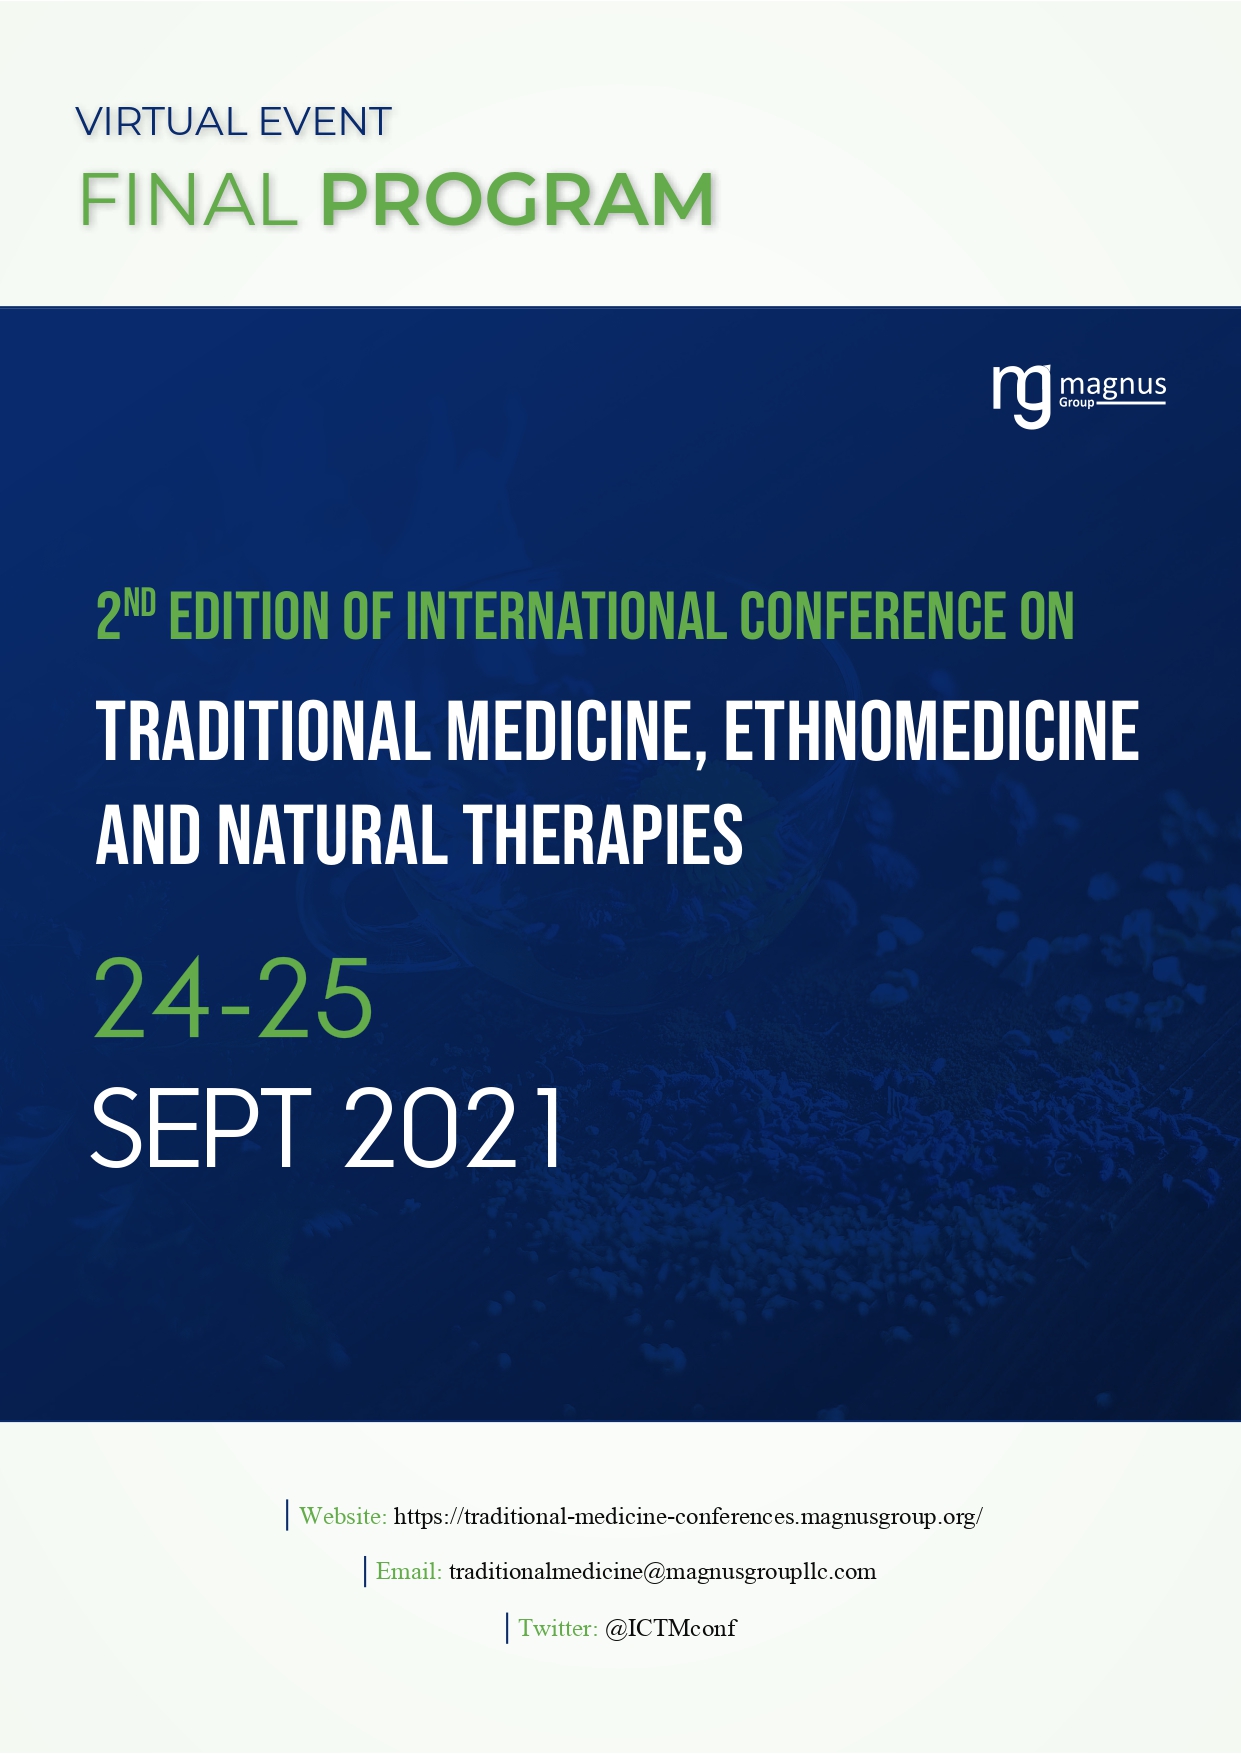 2nd Edition of International Conference on Traditional Medicine, Ethnomedicine and Natural Therapies Program